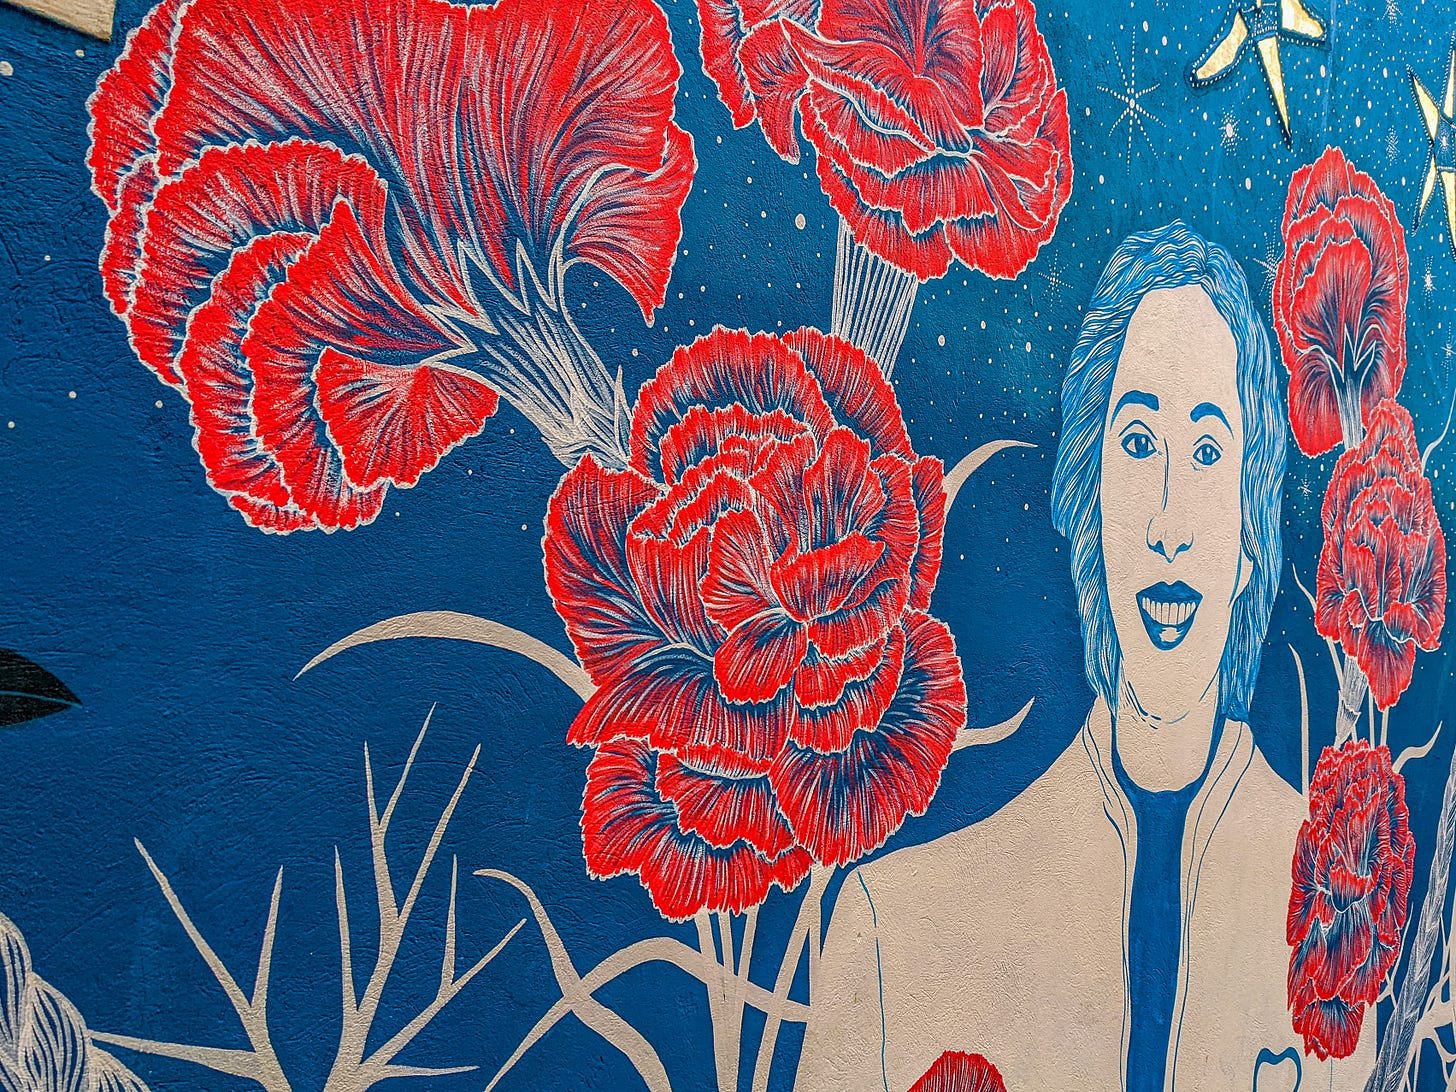 A mural showing a smiling woman in front of blue background filled with red flowers. 